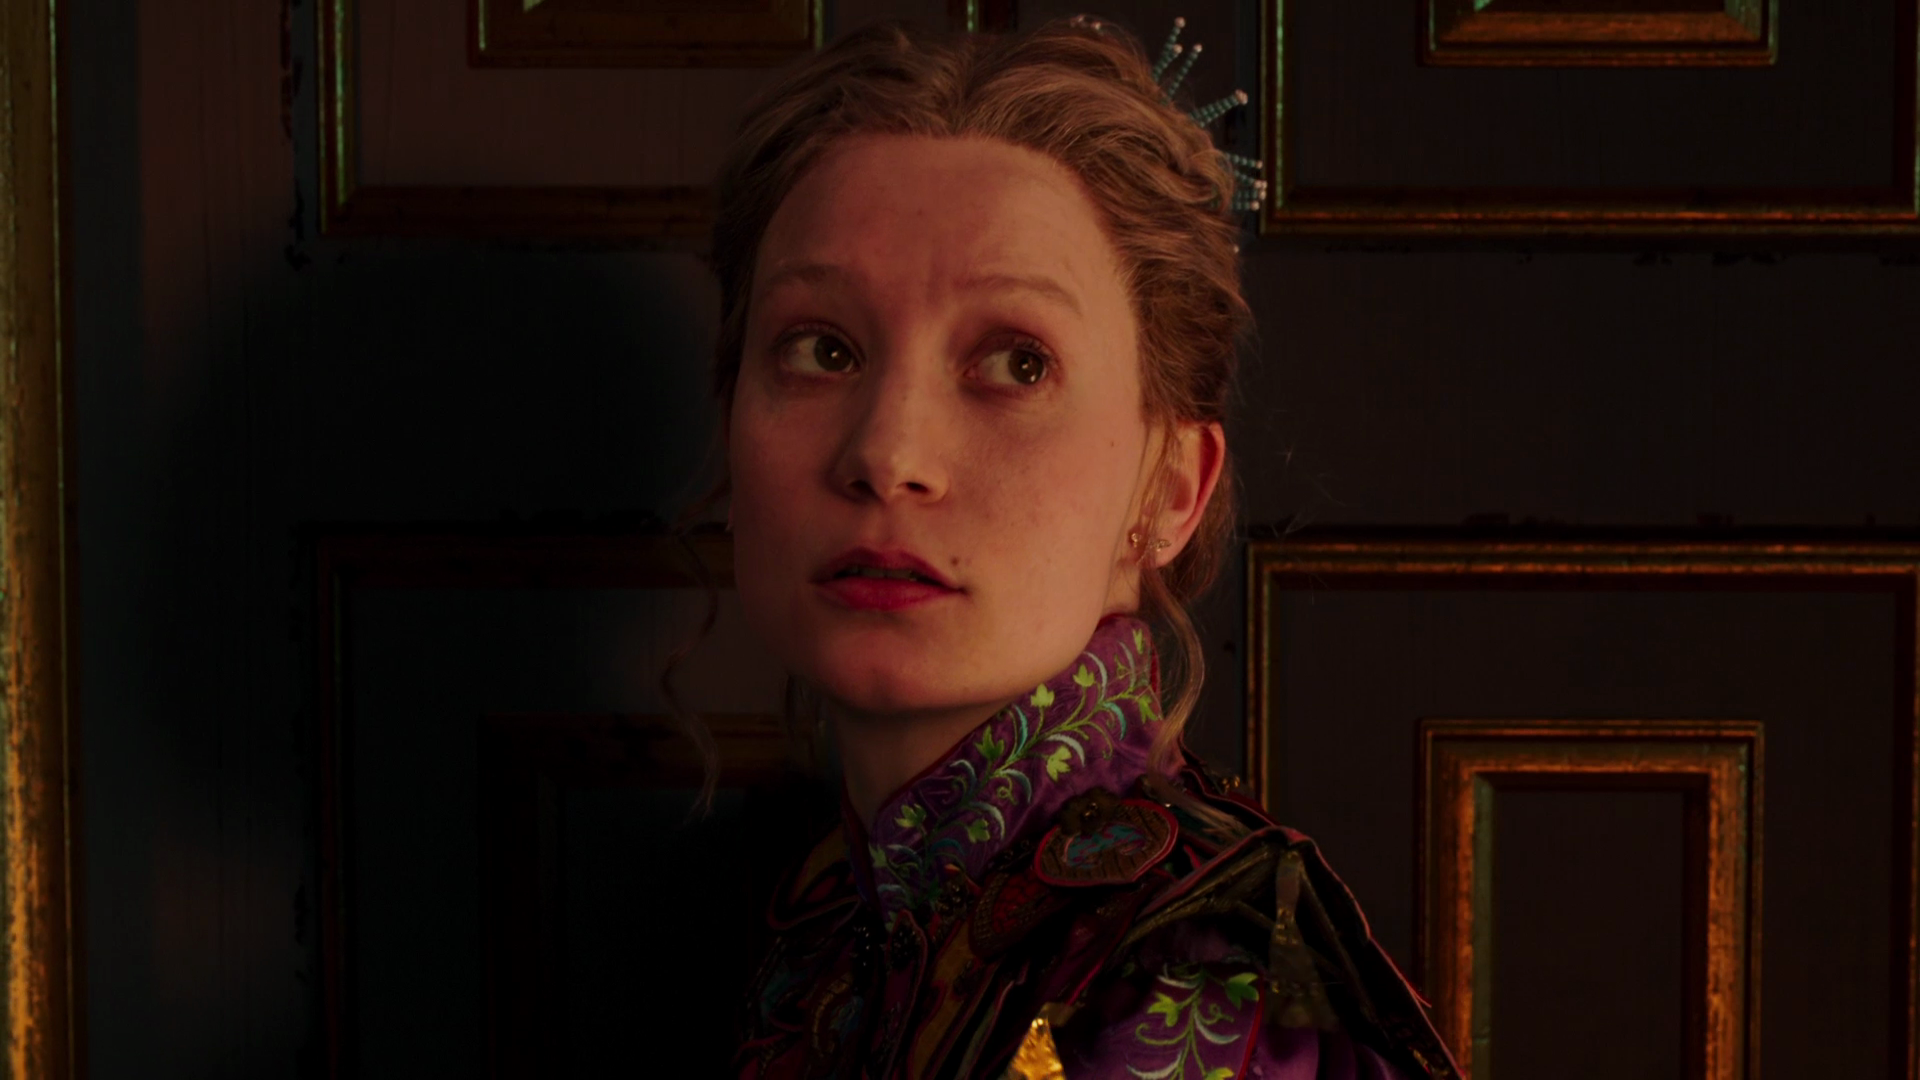 Alice_Through_The_Looking_Glass_HD_Screencaps-1.png